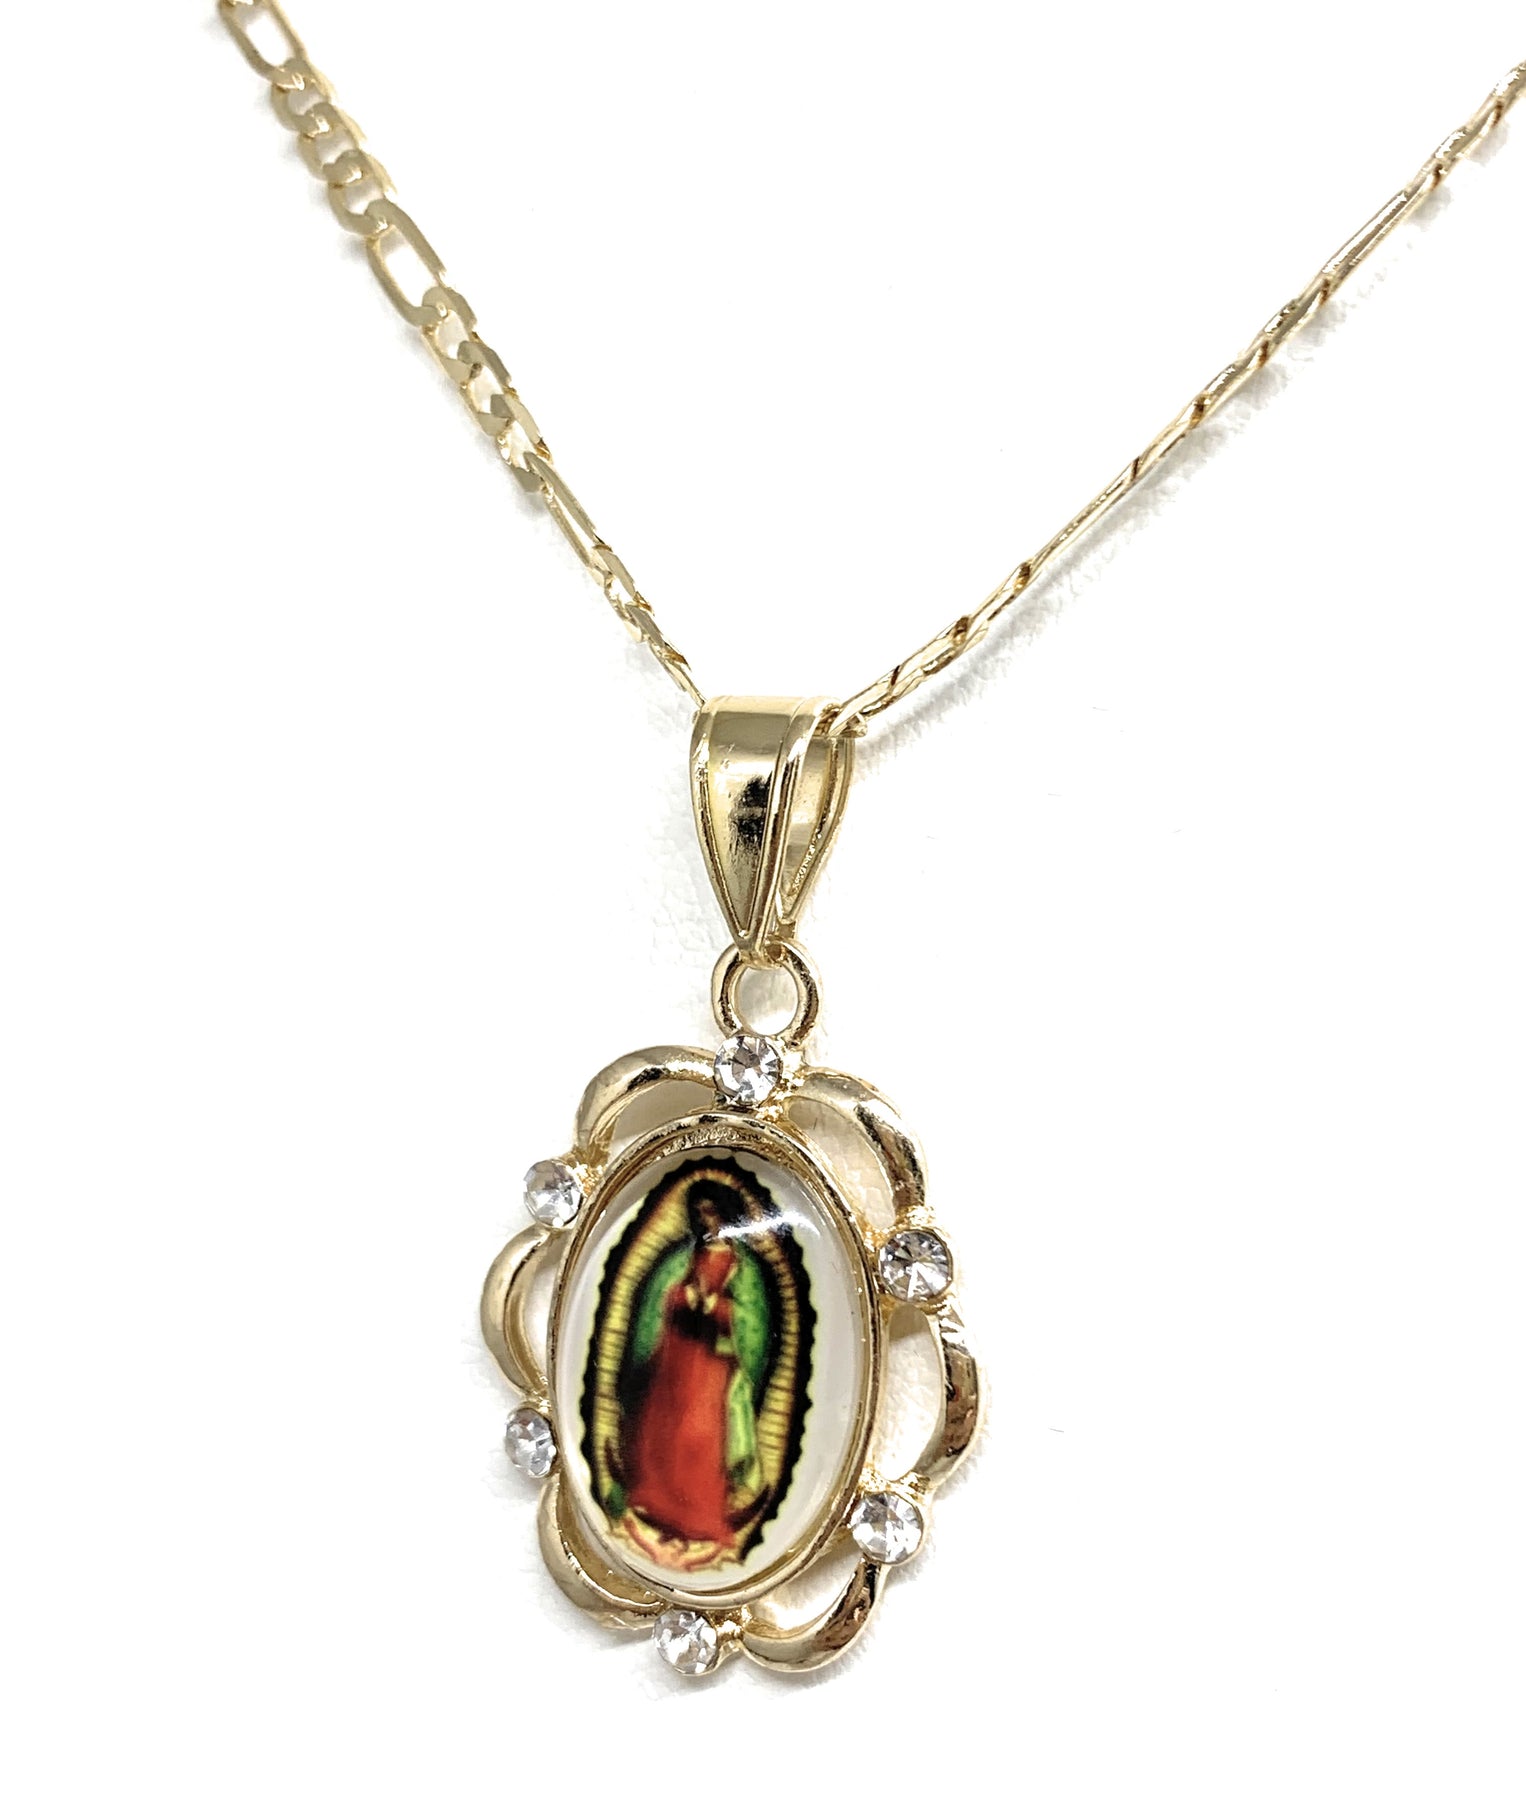 Gold Plated Virgin Mary Pendant Necklace Virgen de Guadalupe